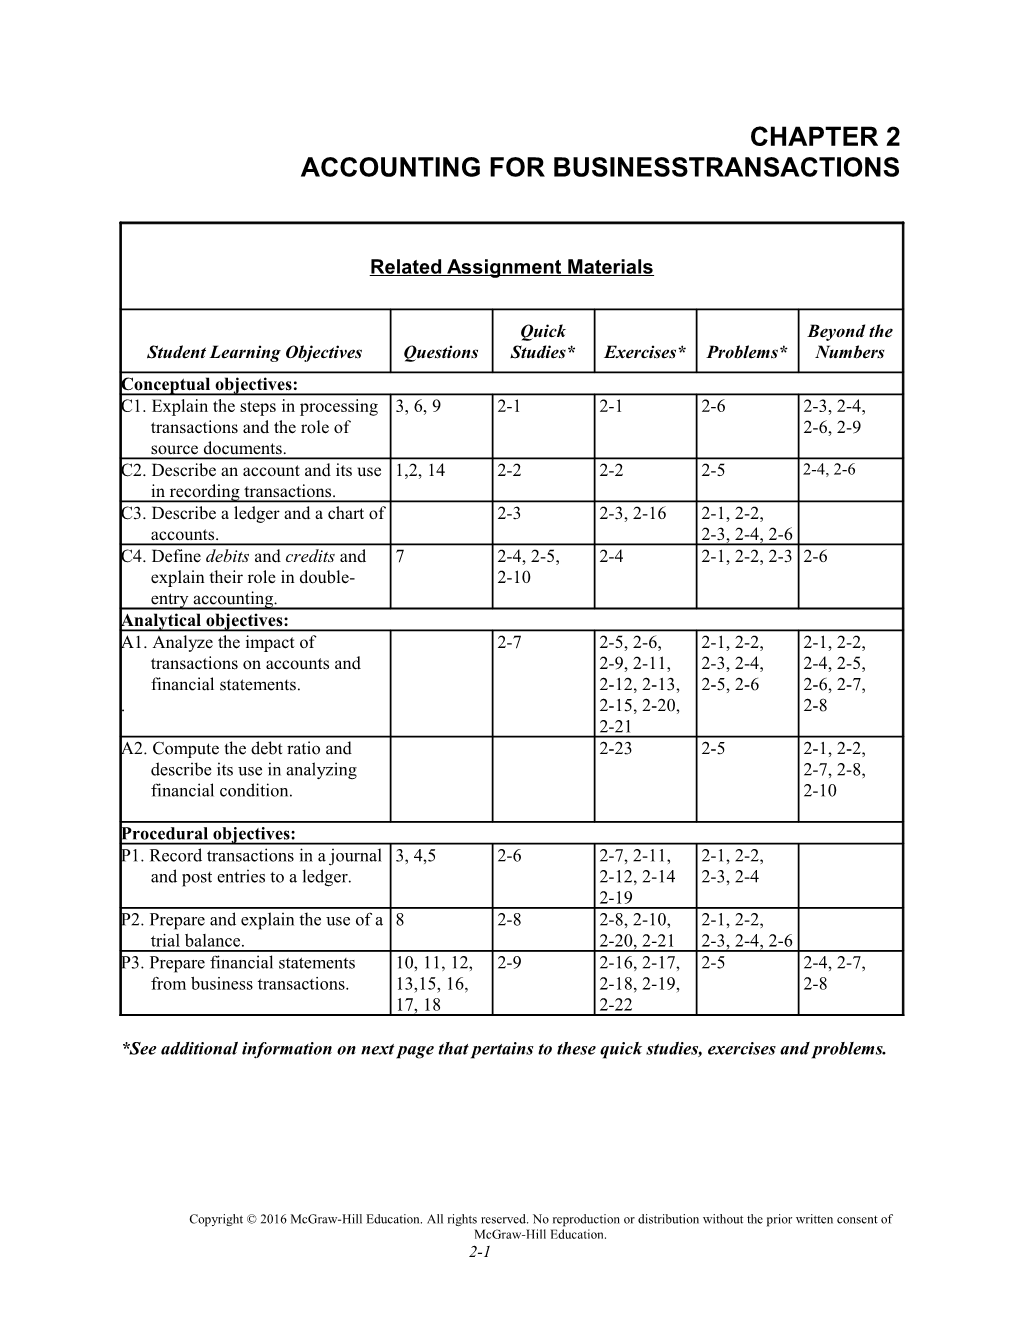 Accounting for Businesstransactions